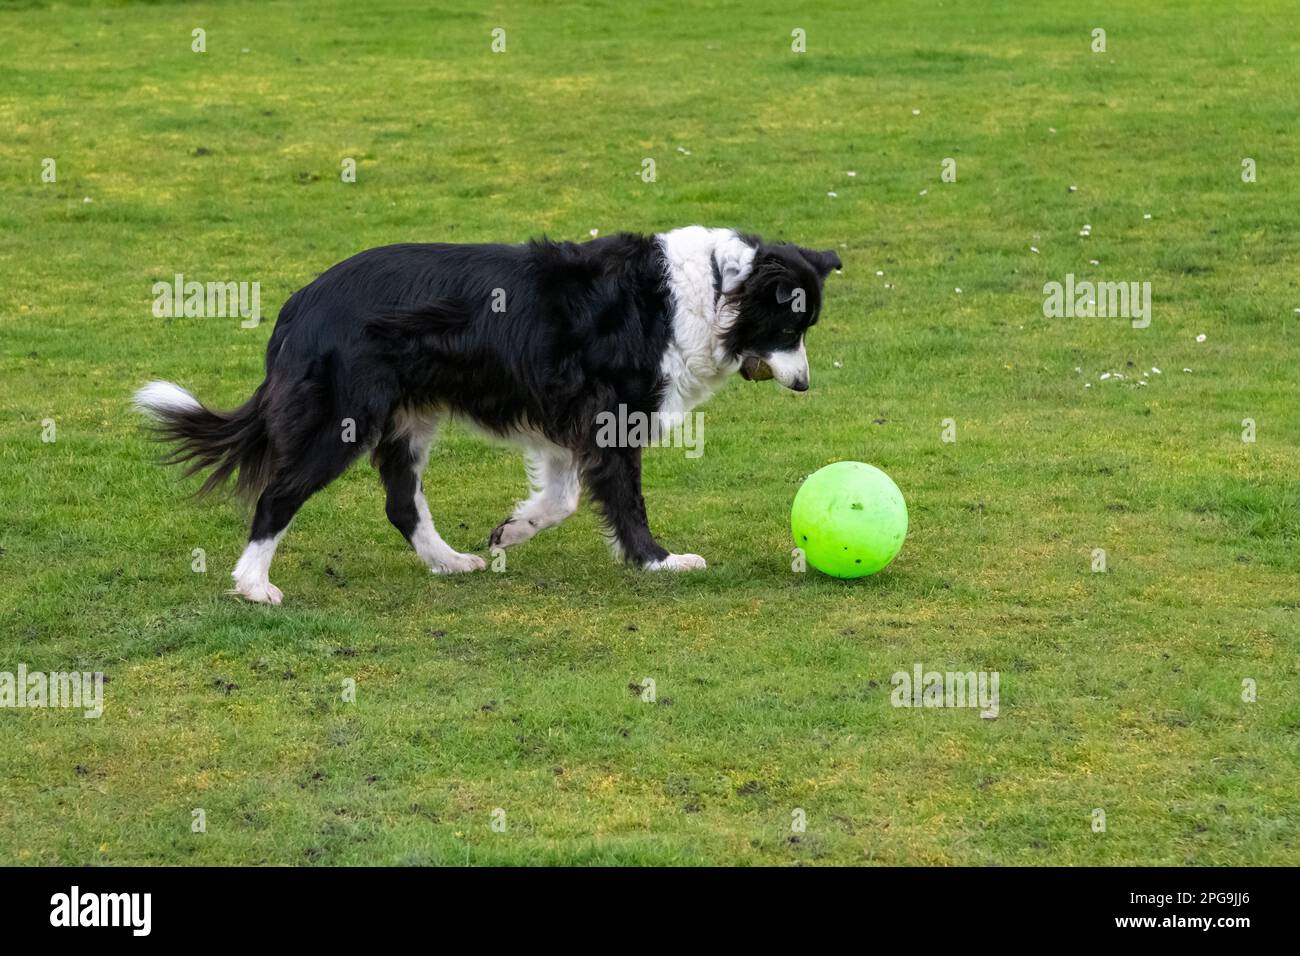 Mature Border Collie dog playing outside with a green football in a field with short grass while holding a tennis ball in her mouth. Stock Photo